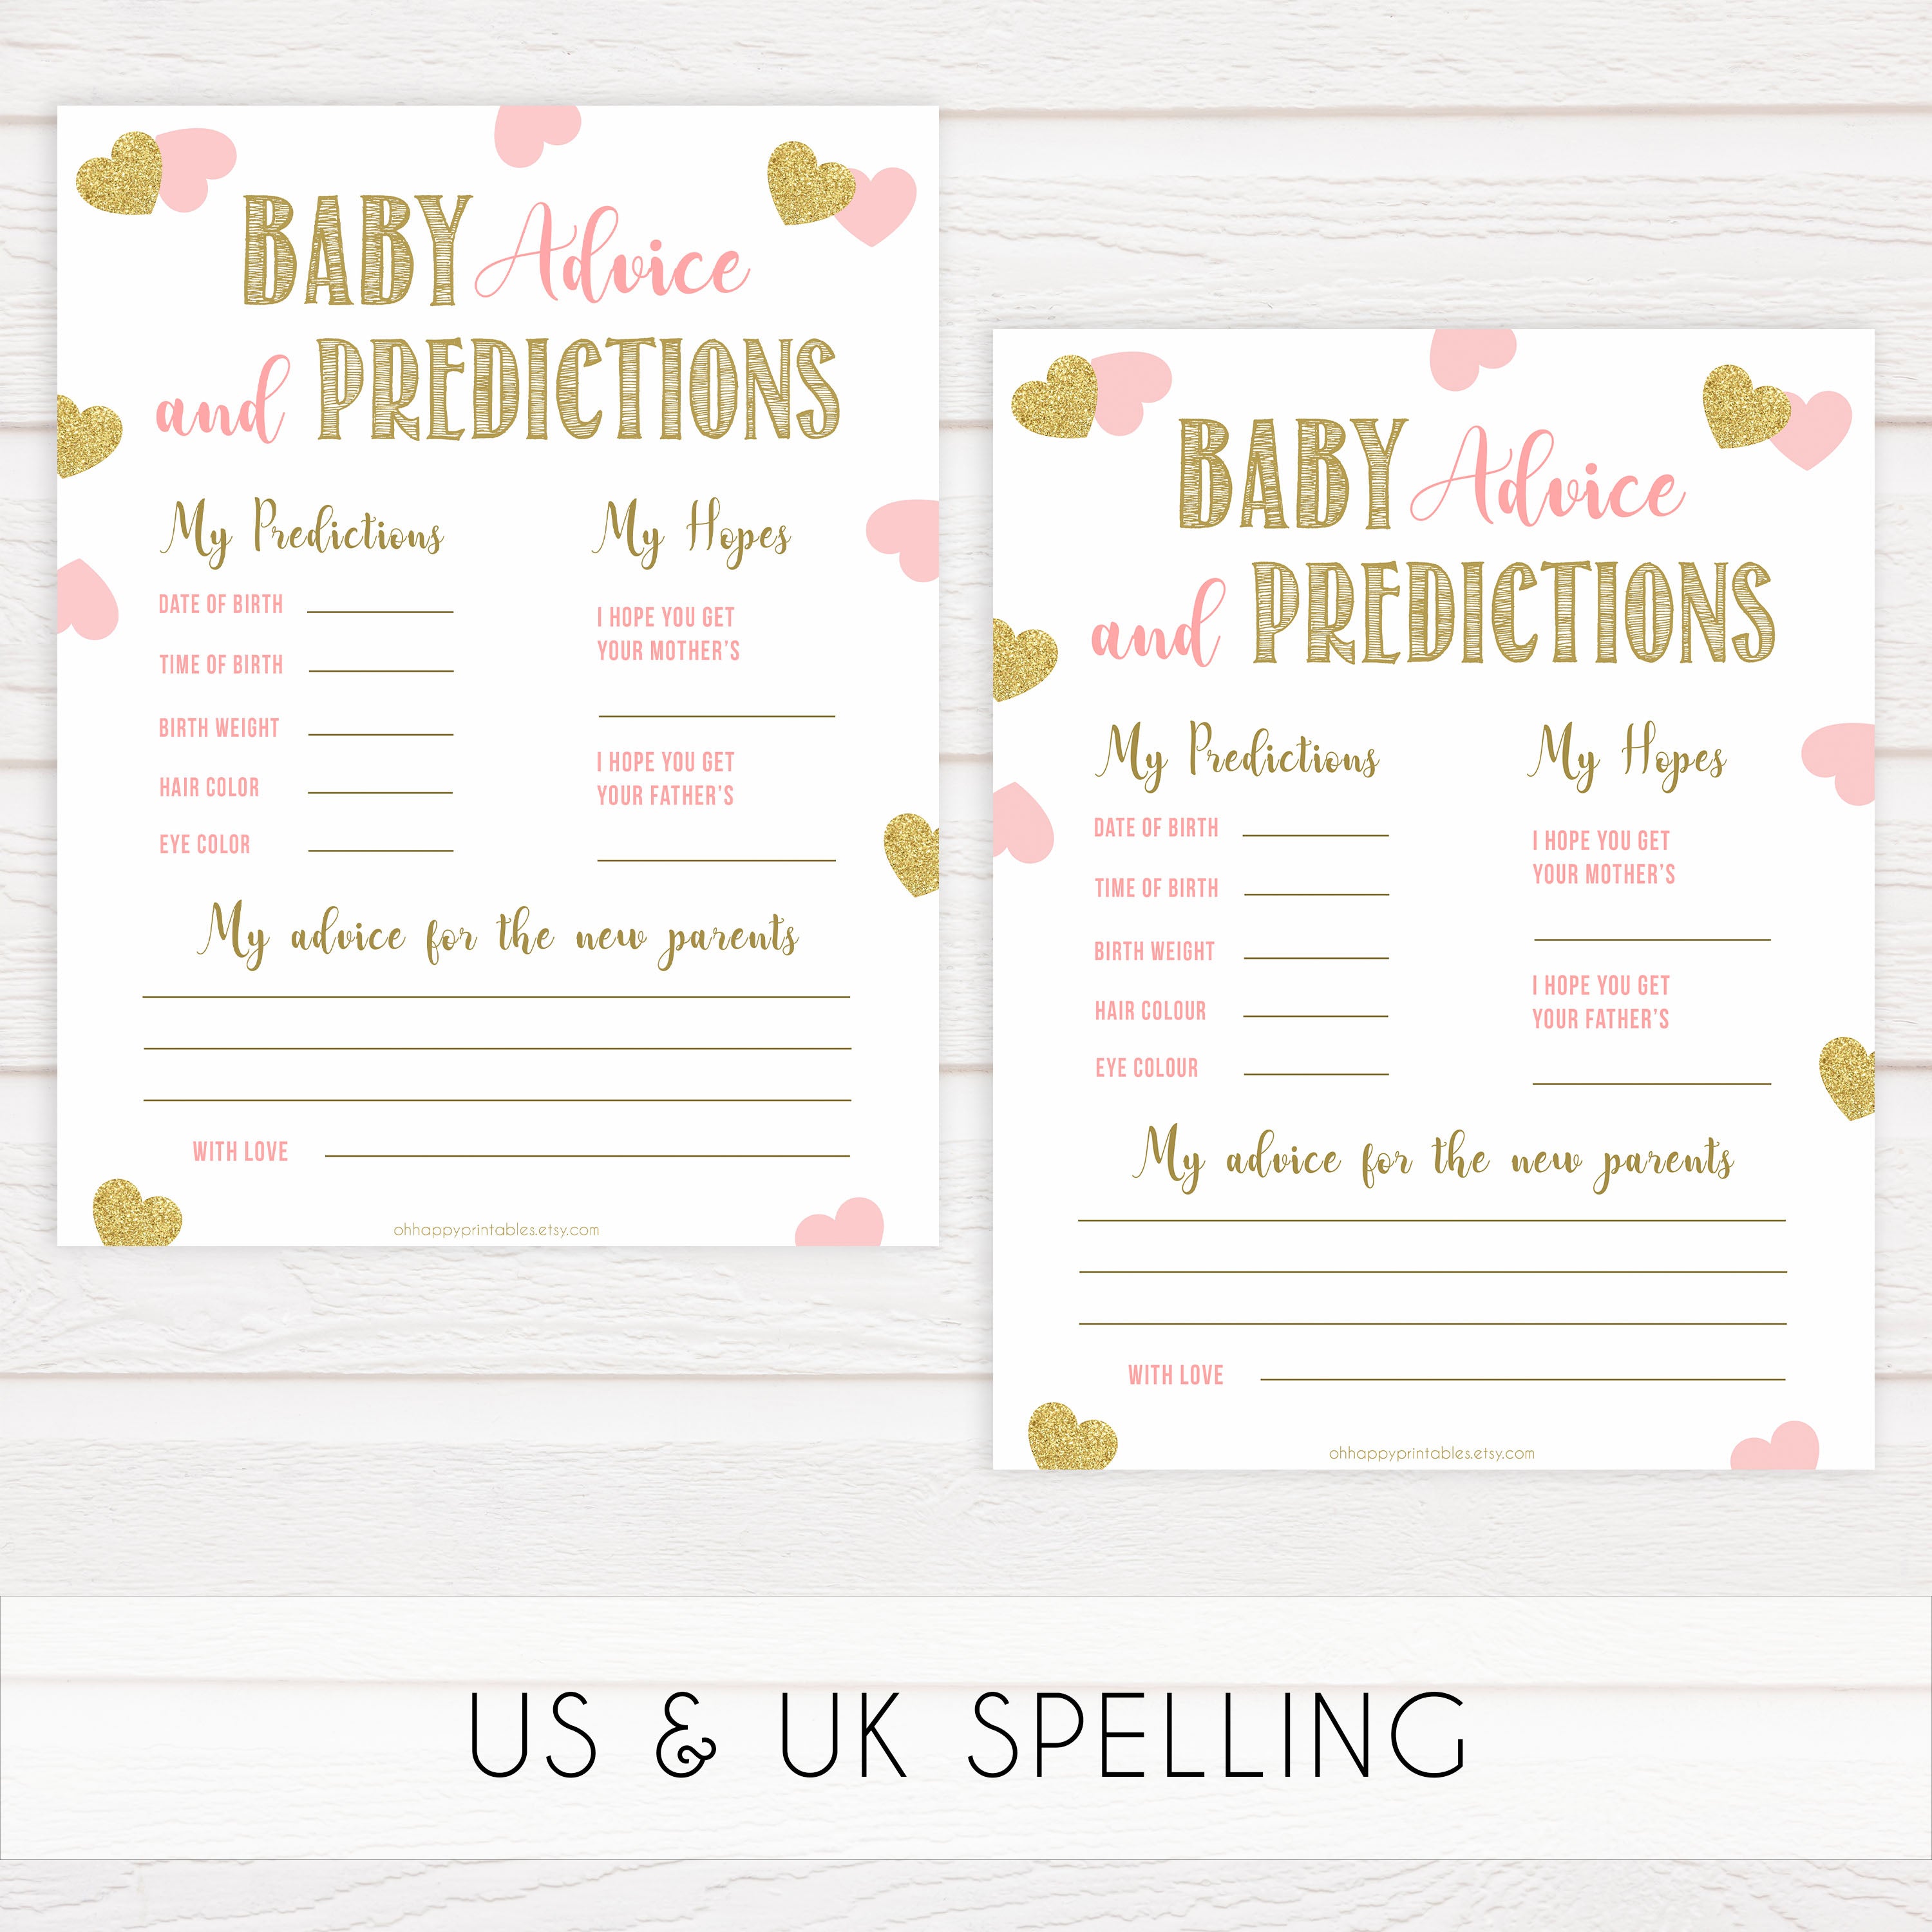 baby advice and predictions keepsake, baby advice, Printable baby shower games, large pink hearts fun baby games, baby shower games, fun baby shower ideas, top baby shower ideas, gold pink hearts shower baby shower, pink hearts baby shower ideas